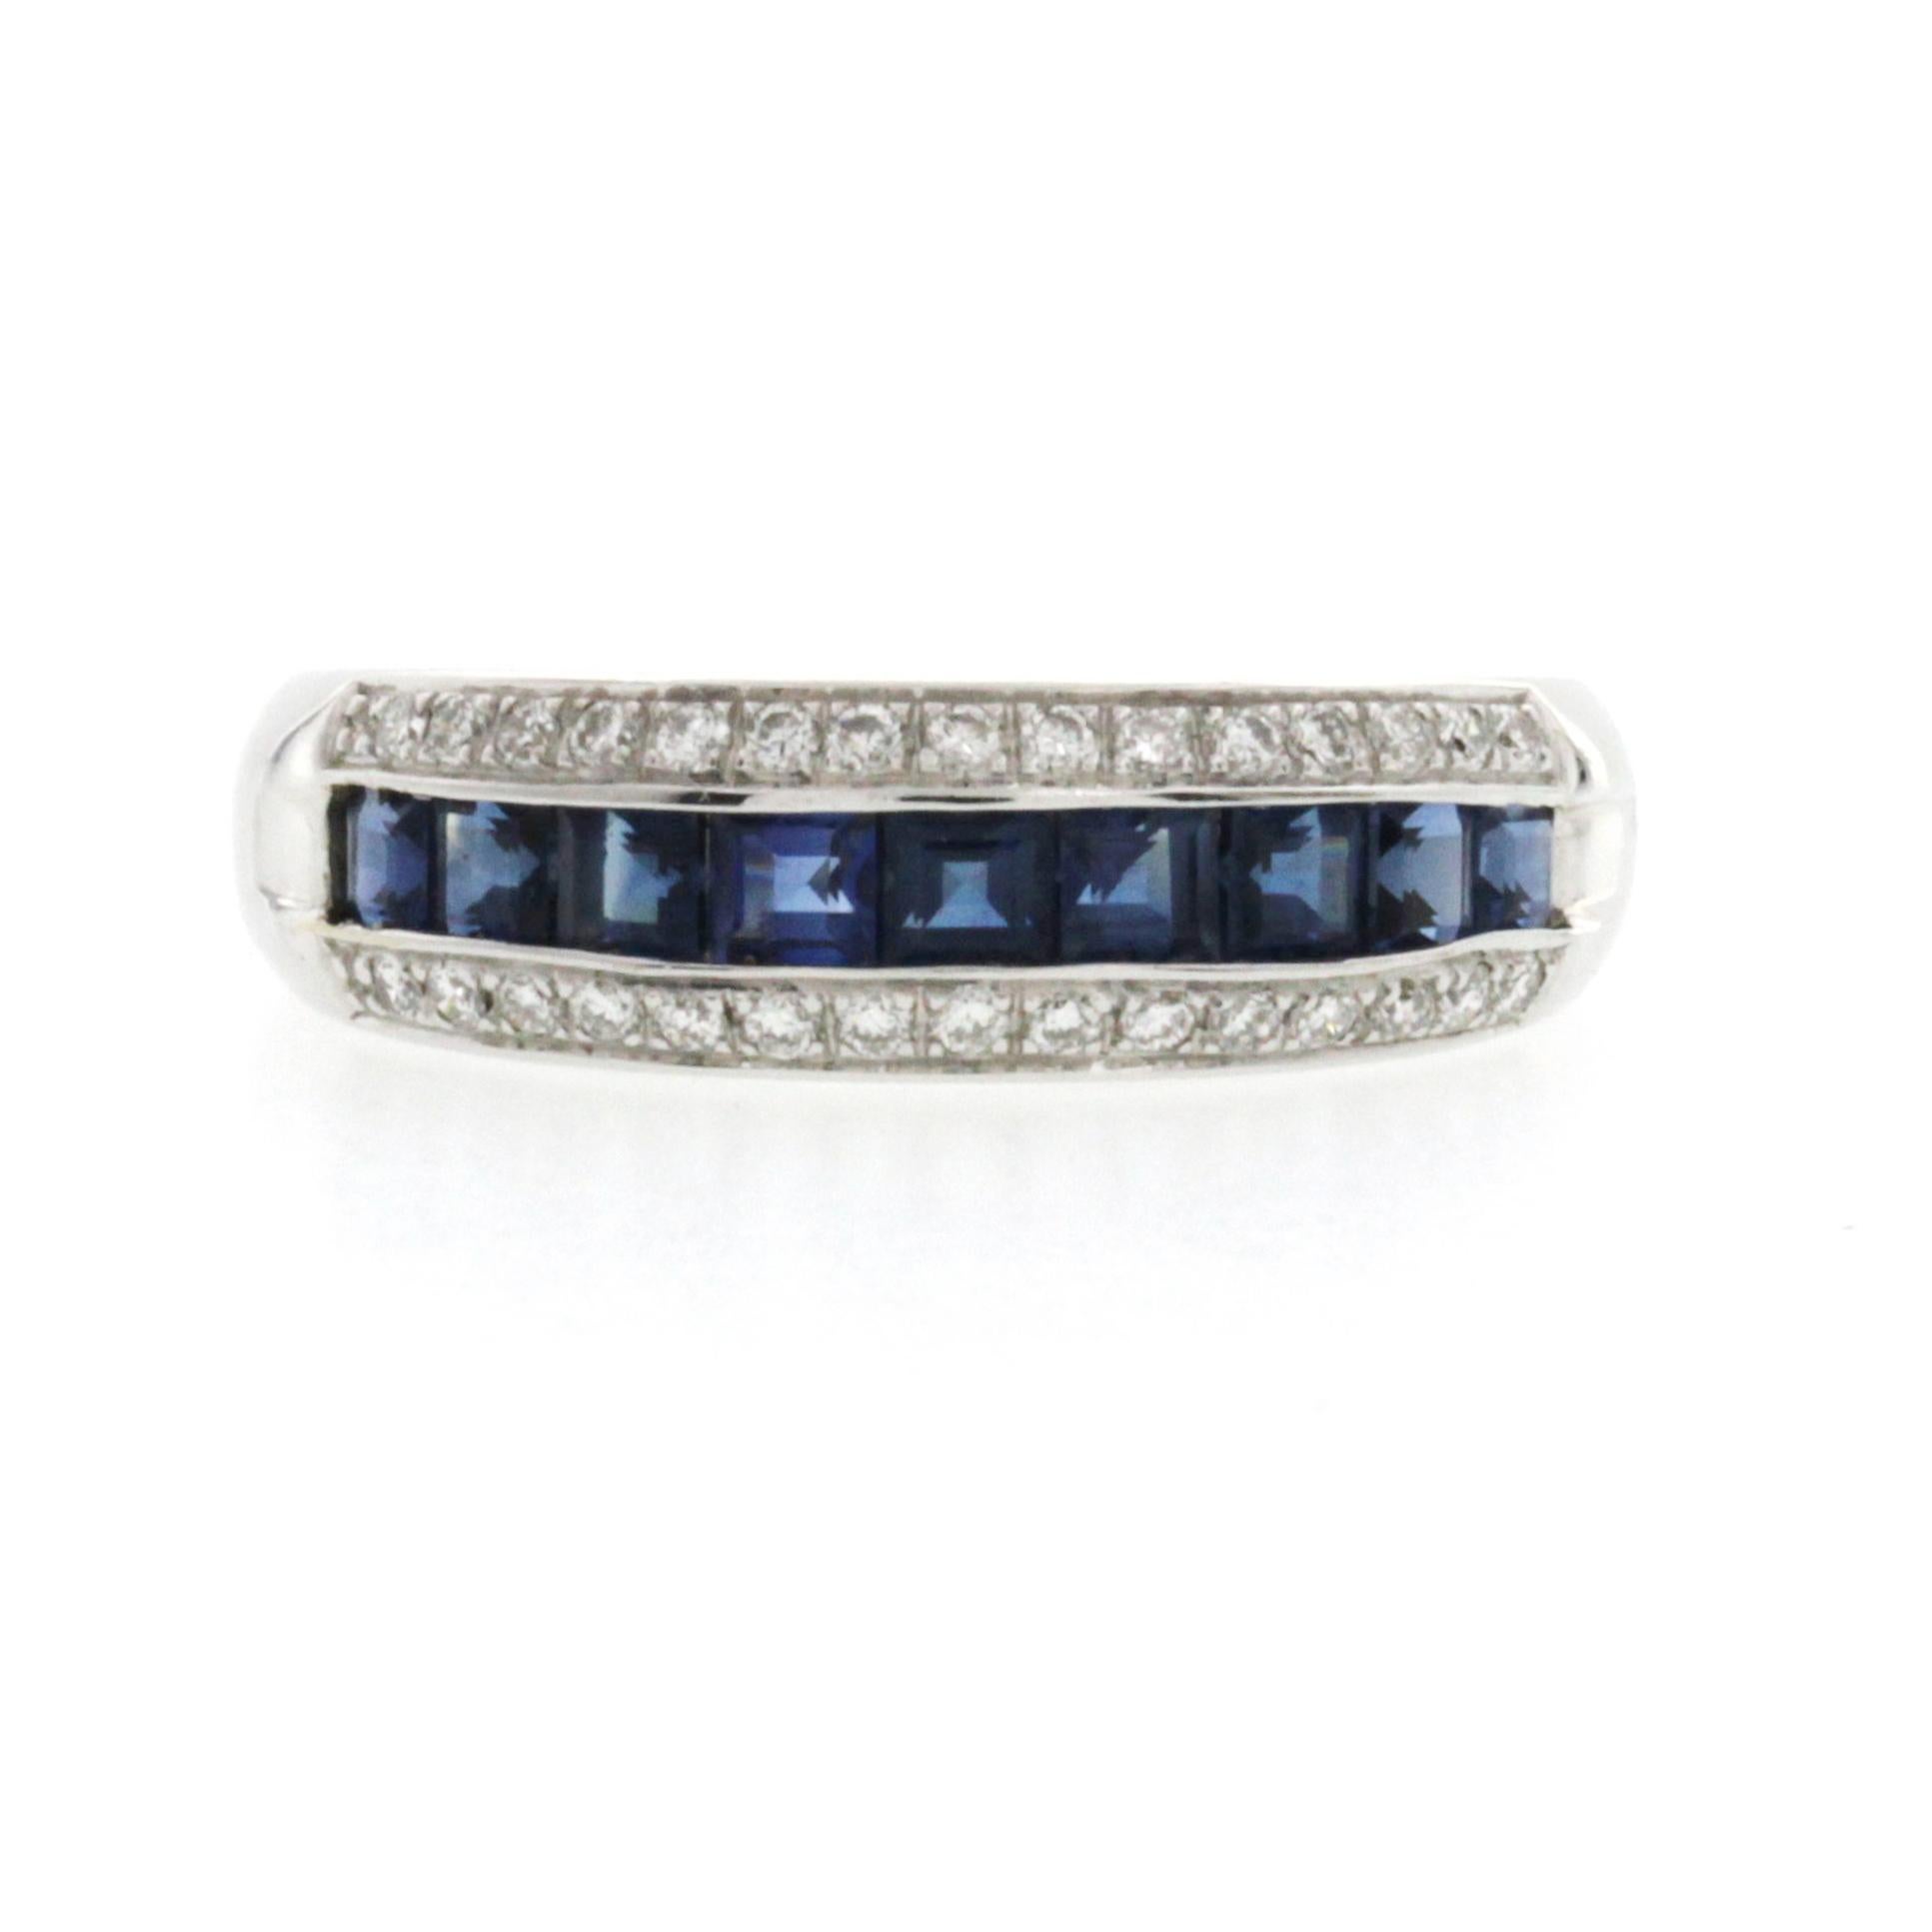 100% Authentic, 100% Customer Satisfaction

Top: 6 mm

Band Width: 3 mm

Metal: 18K White Gold 

Size: 6-8 ( Please message Us for your Size )

Hallmarks: 750

Total Weight: 4.8 Grams

Stone Type: 1.14 CT Natural Natural Sapphires & 0.30 G VS1 CT